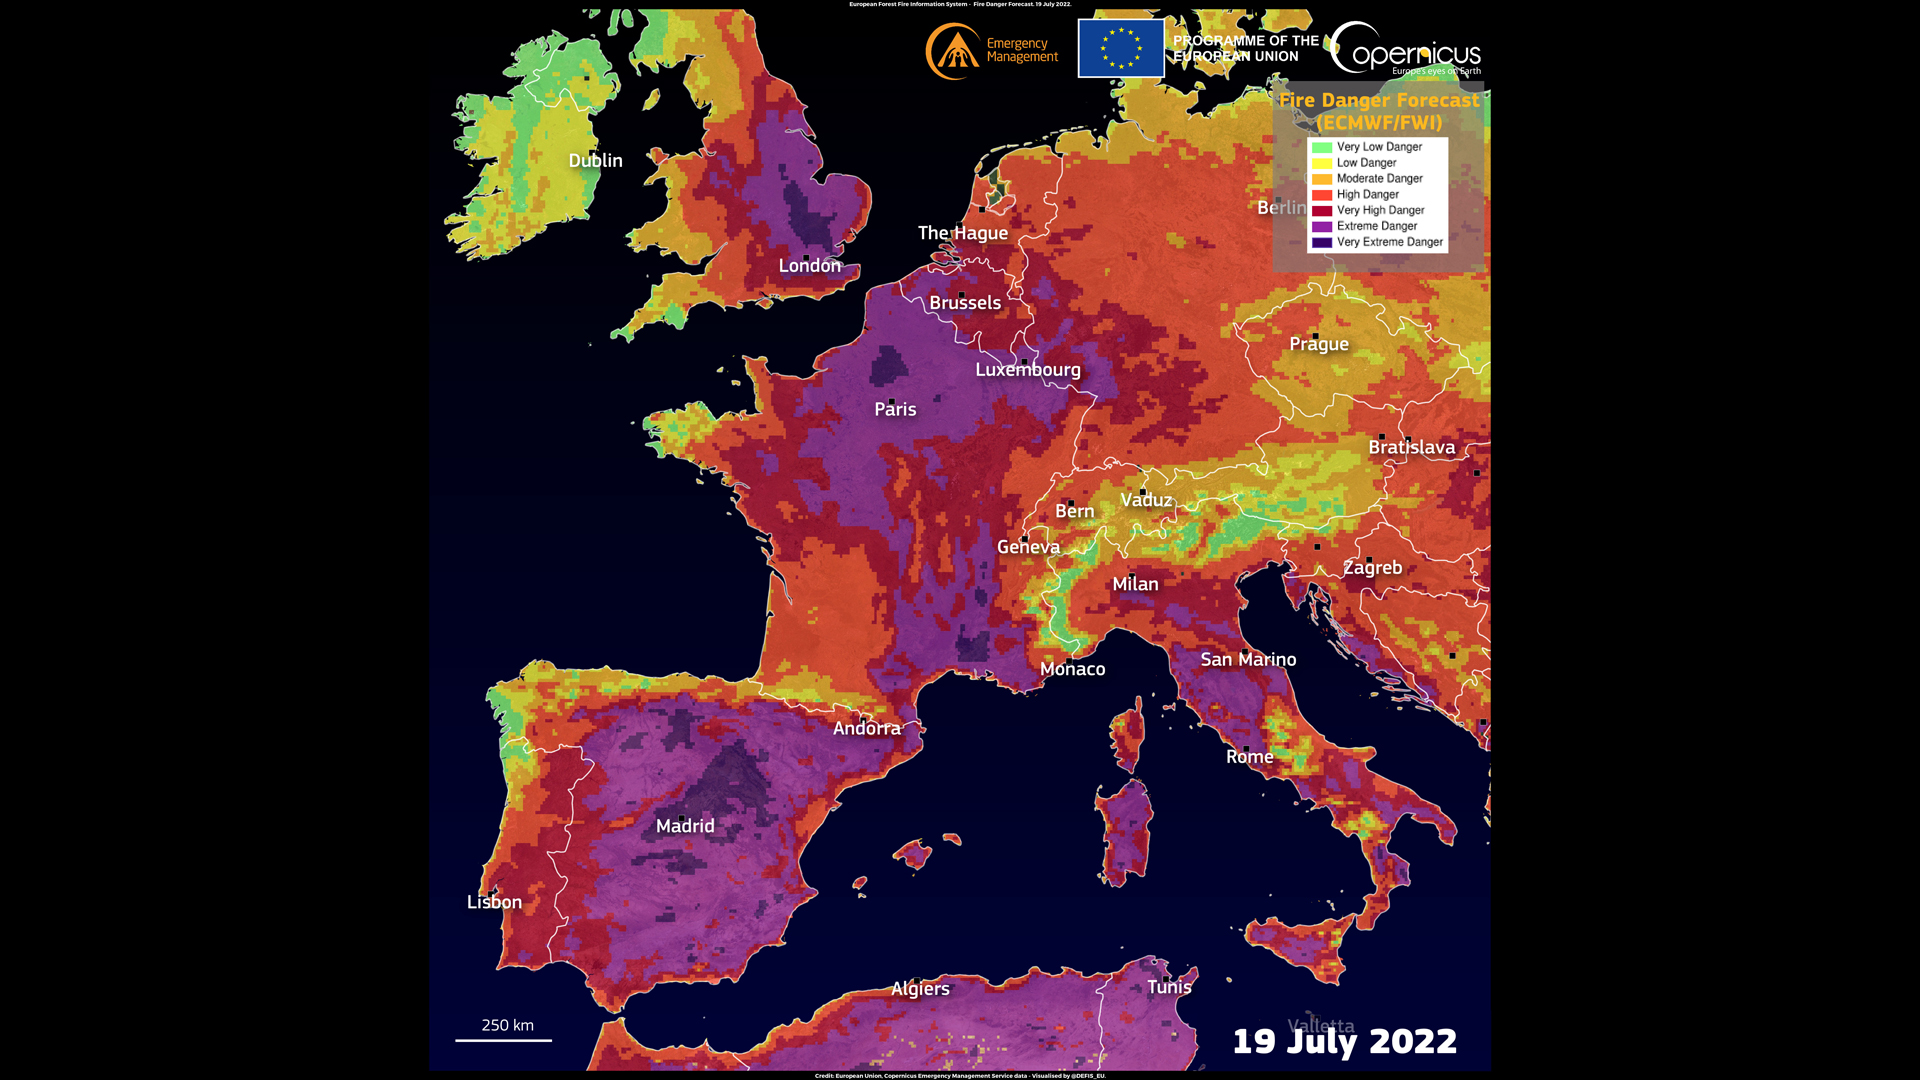 Extreme wildfire risk alerts are in place in several European countries amid a record-breaking heatwave.